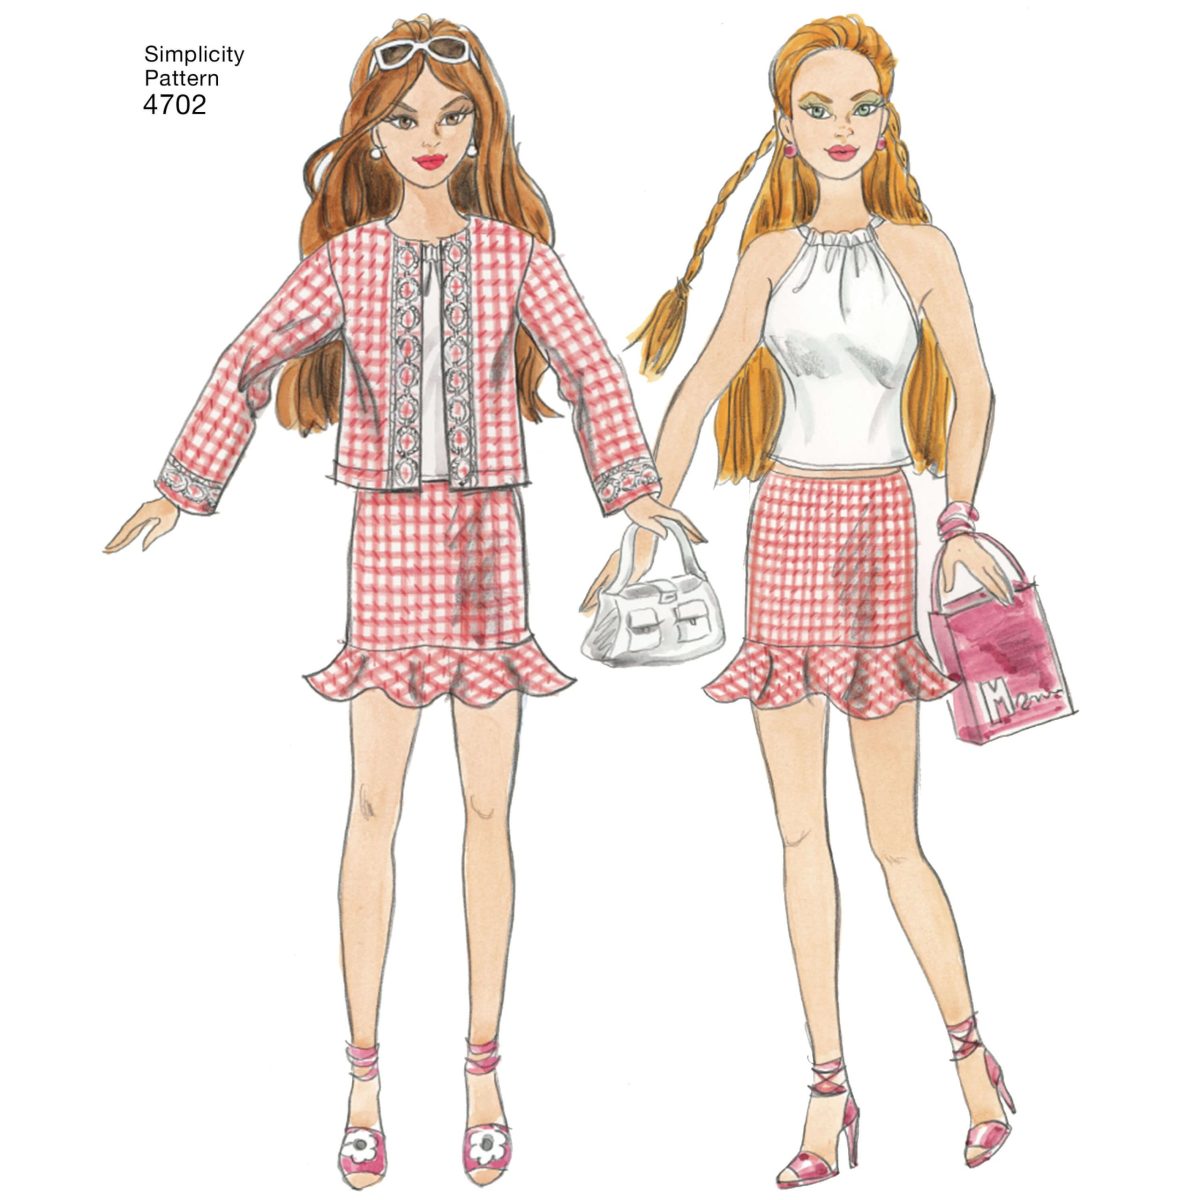 Simplicity Sewing Pattern 4702 Doll Clothes